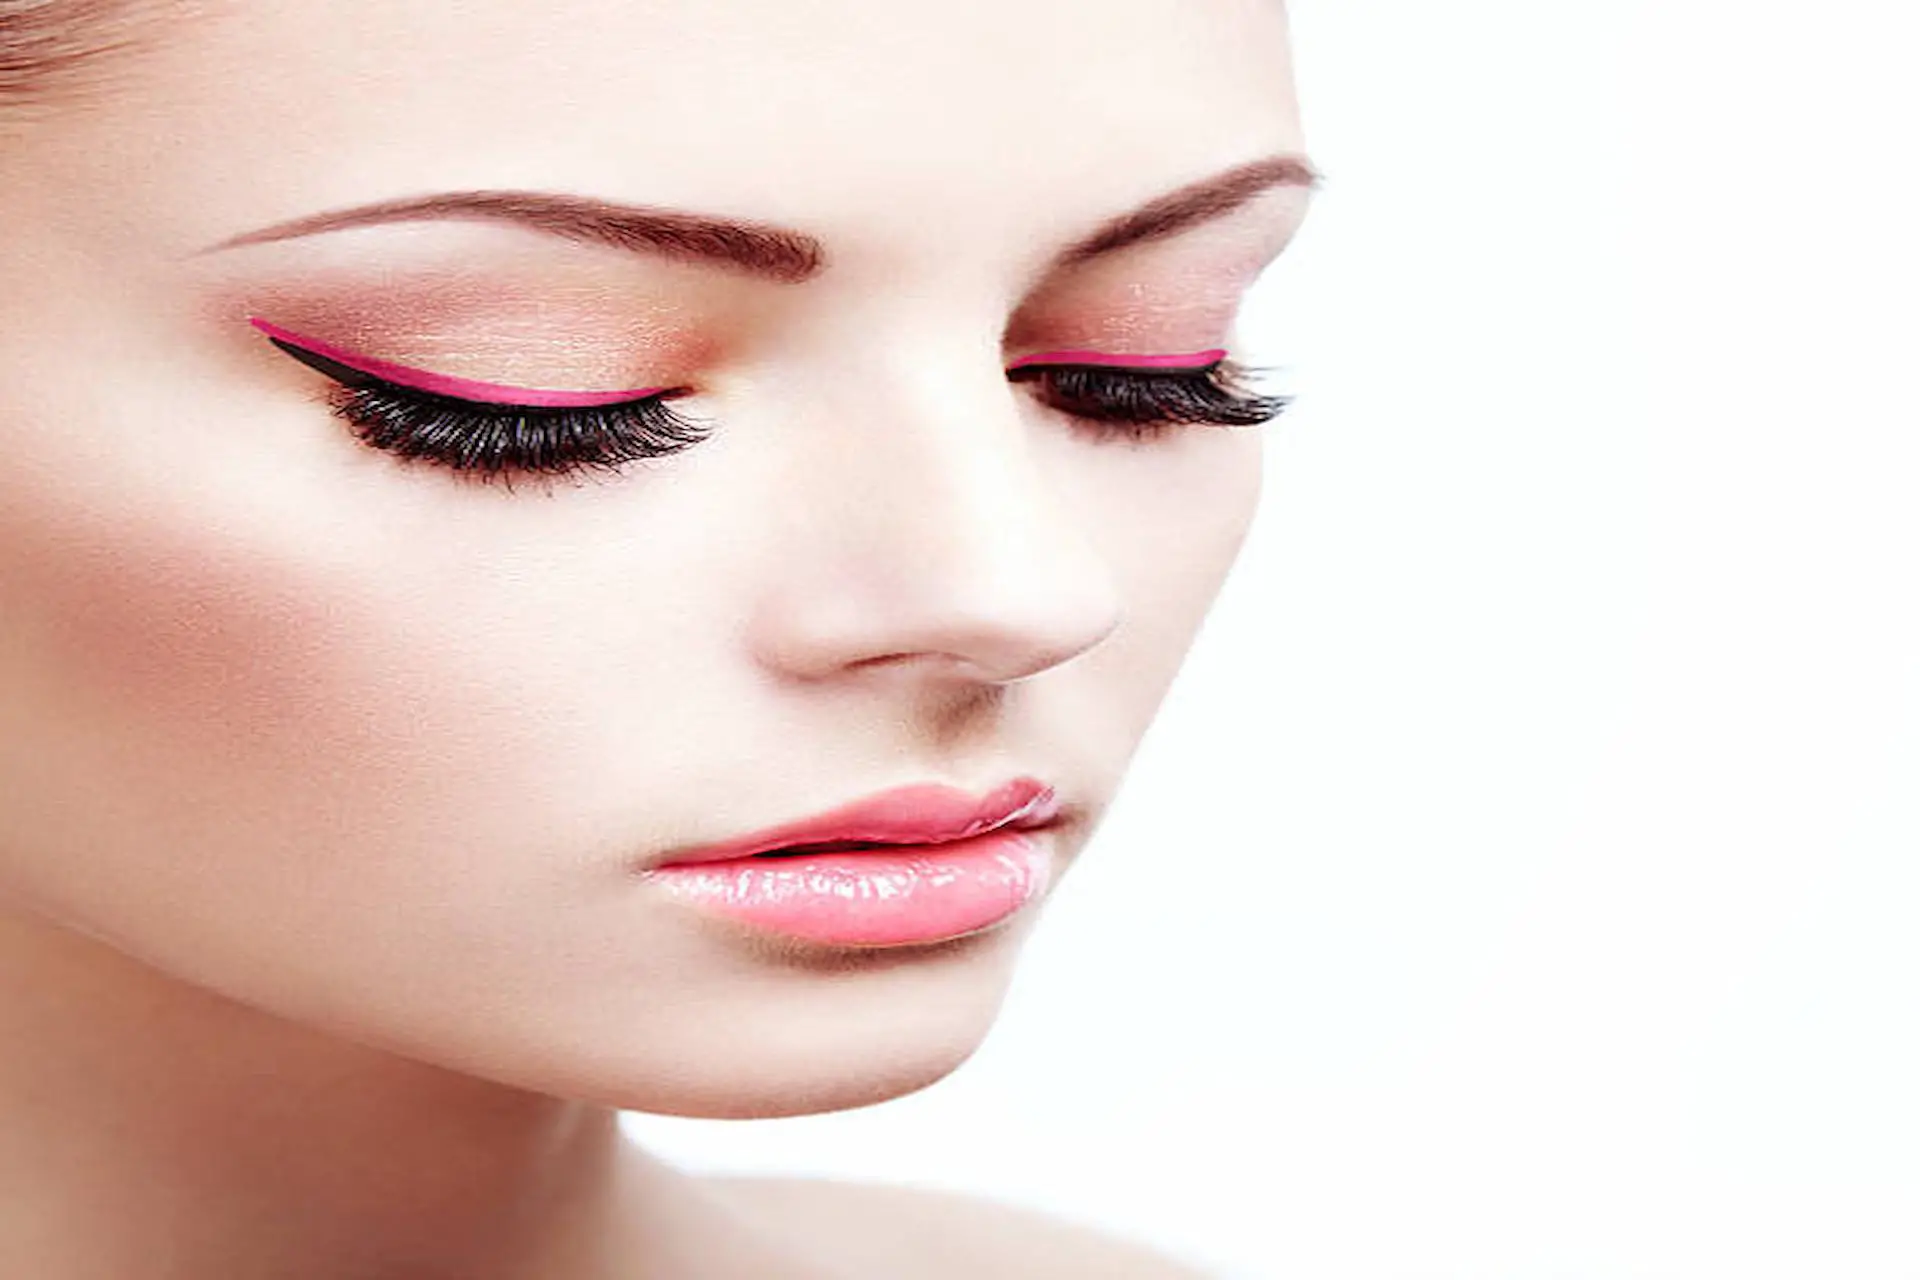 What Is The Difference Between Individual Lashes And Lash Extensions?